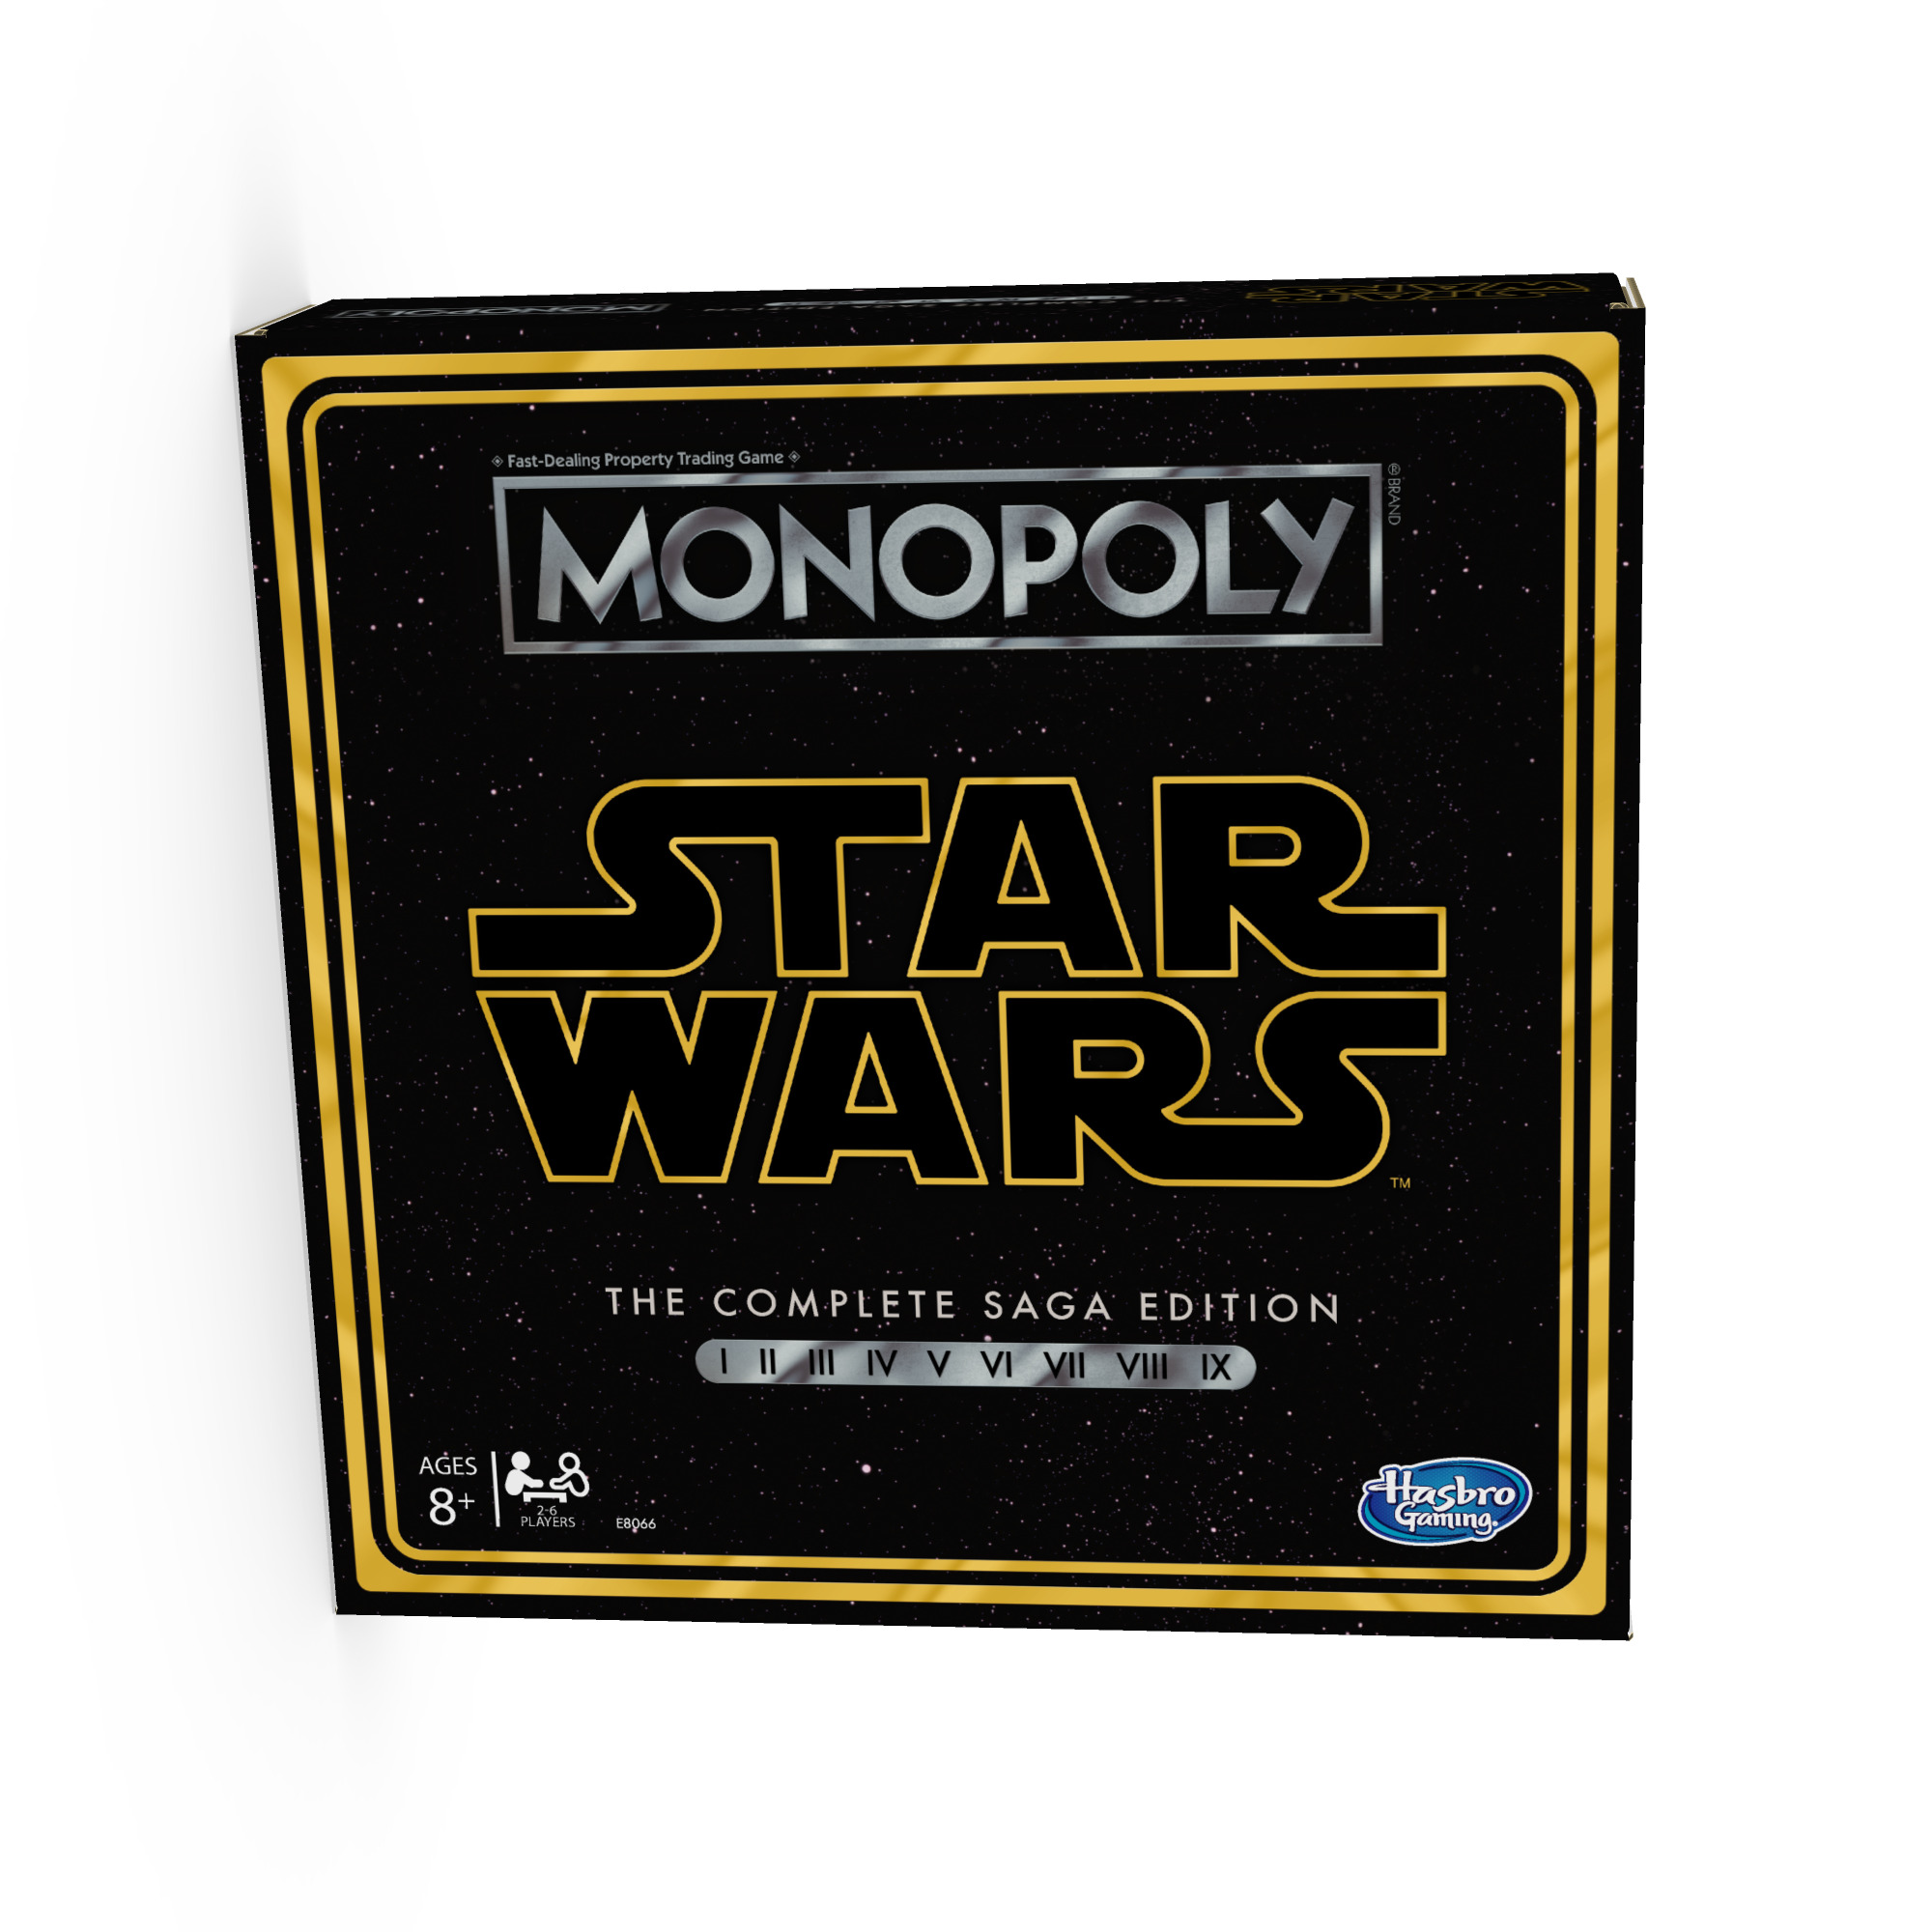 Monopoly: Star Wars The Complete Saga Edition Board Game for Kids - image 3 of 7